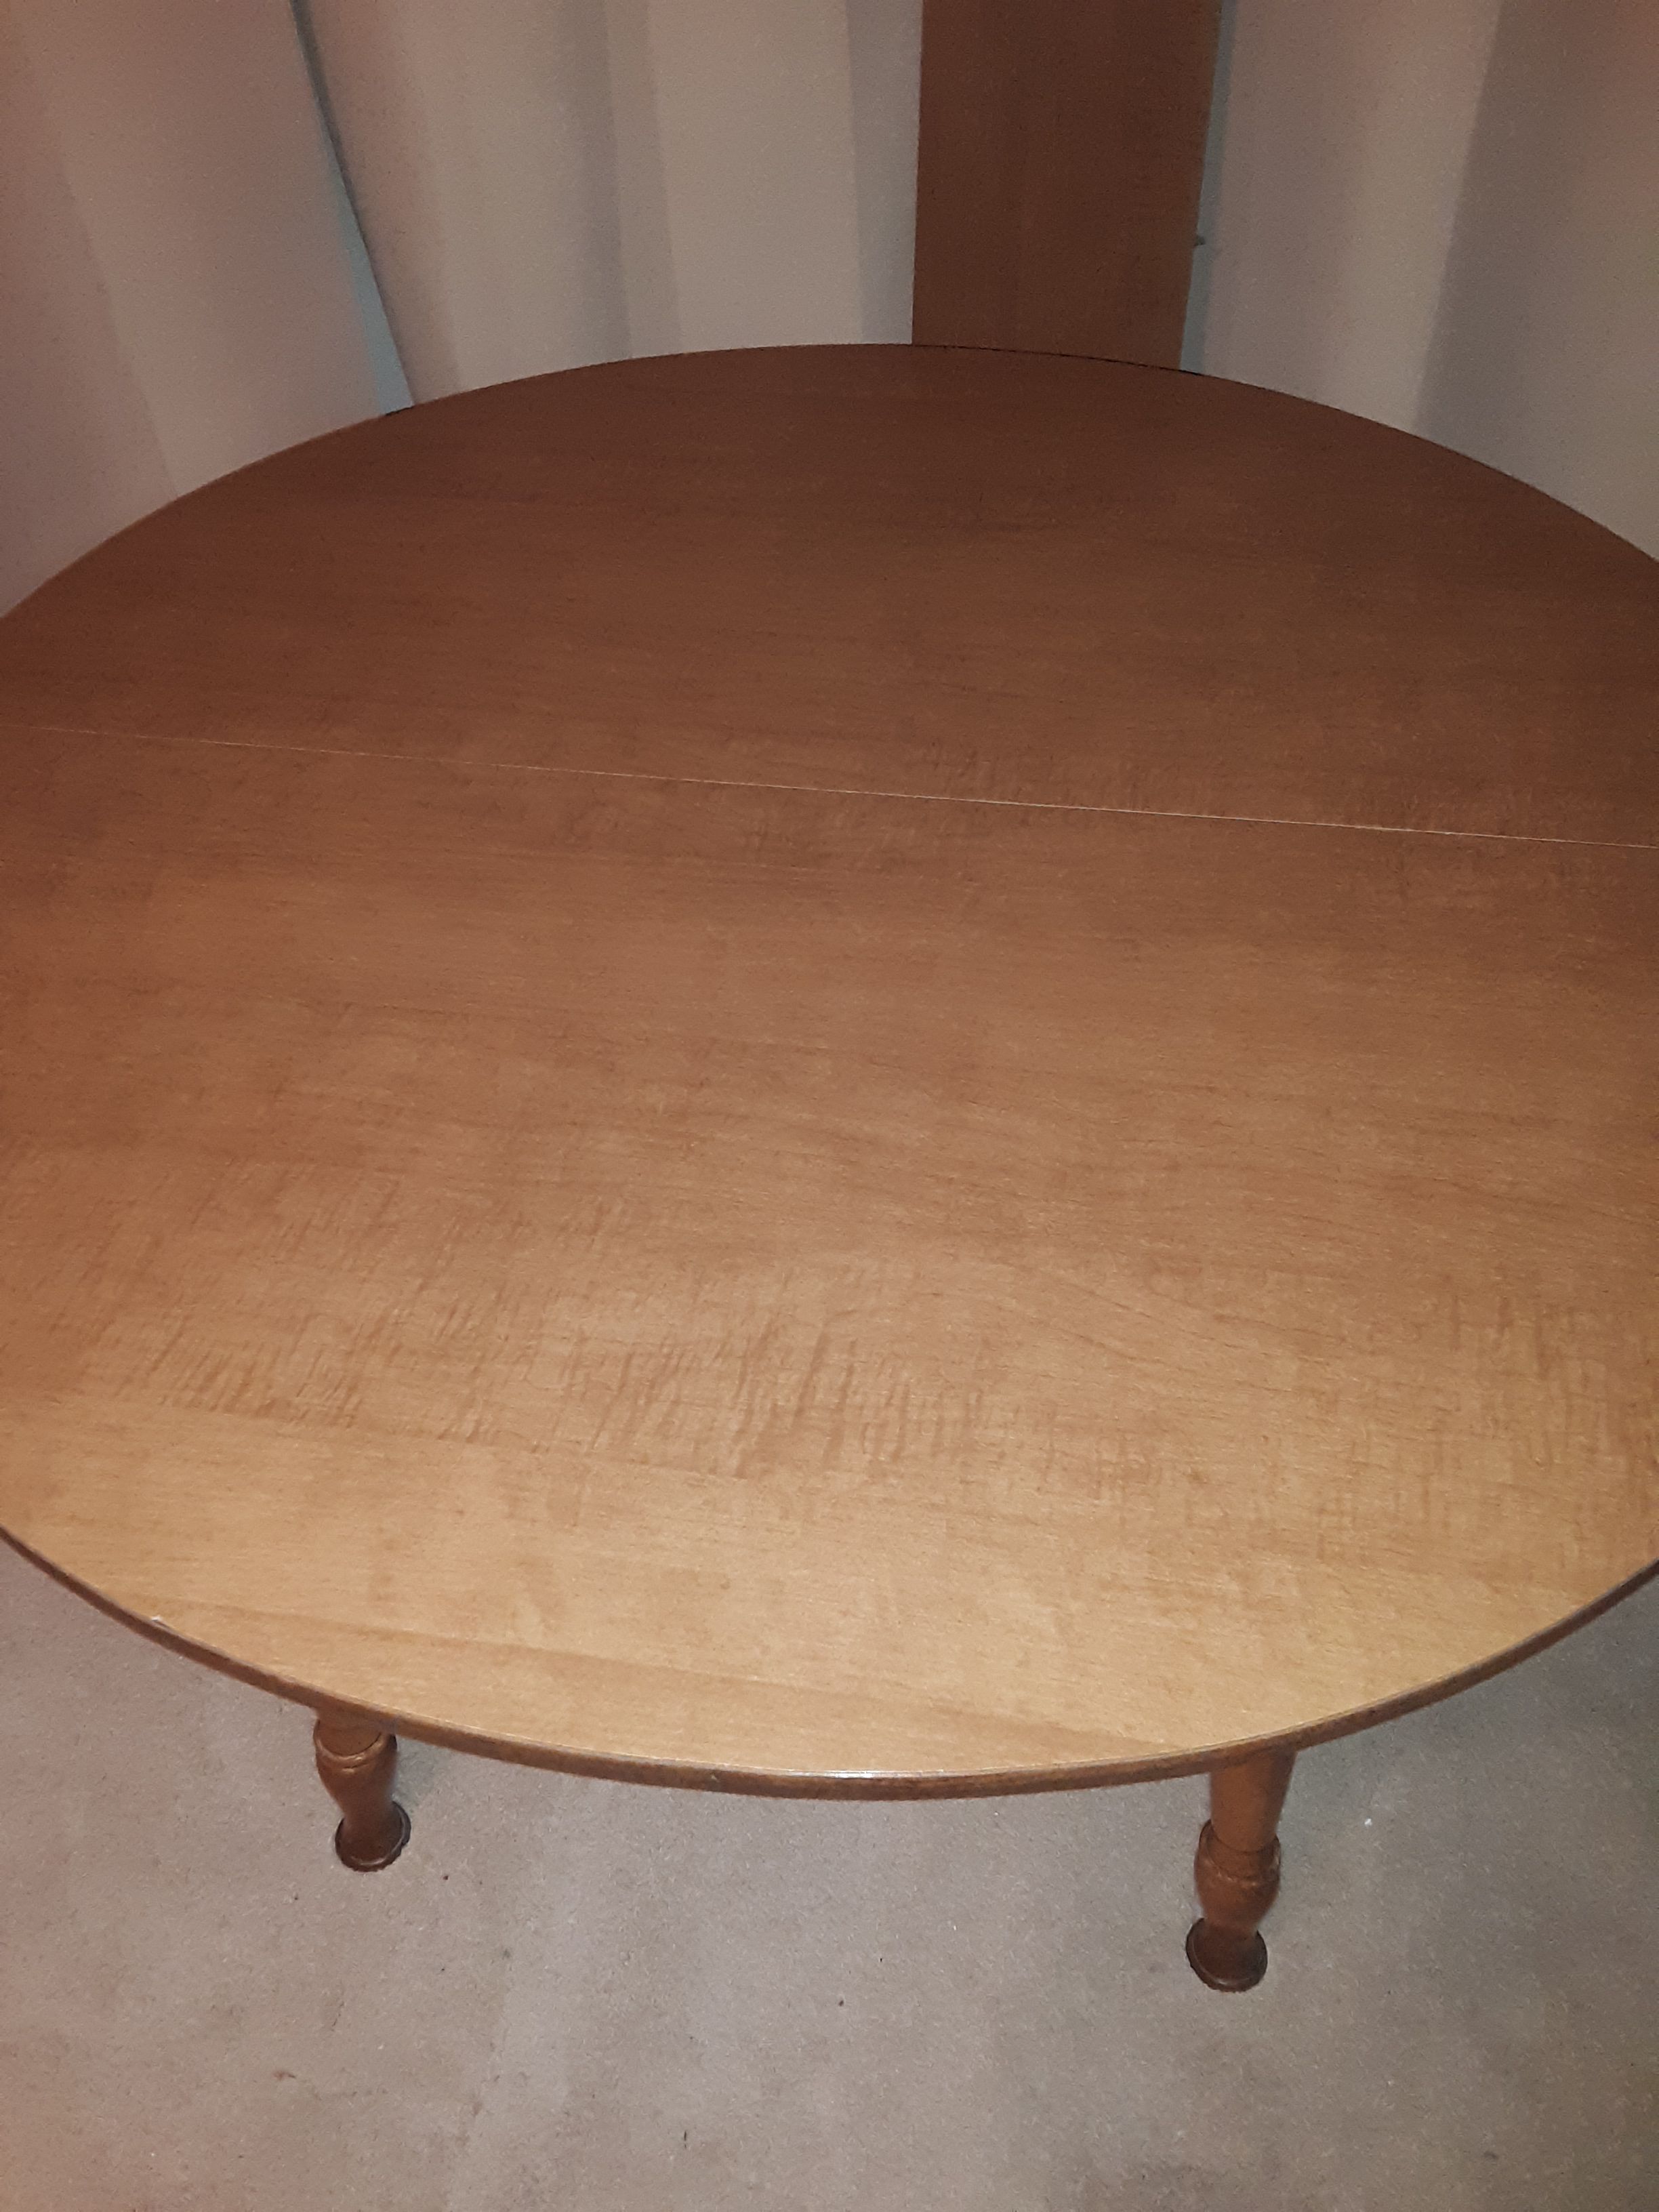 42 inch Round Formica top dining table